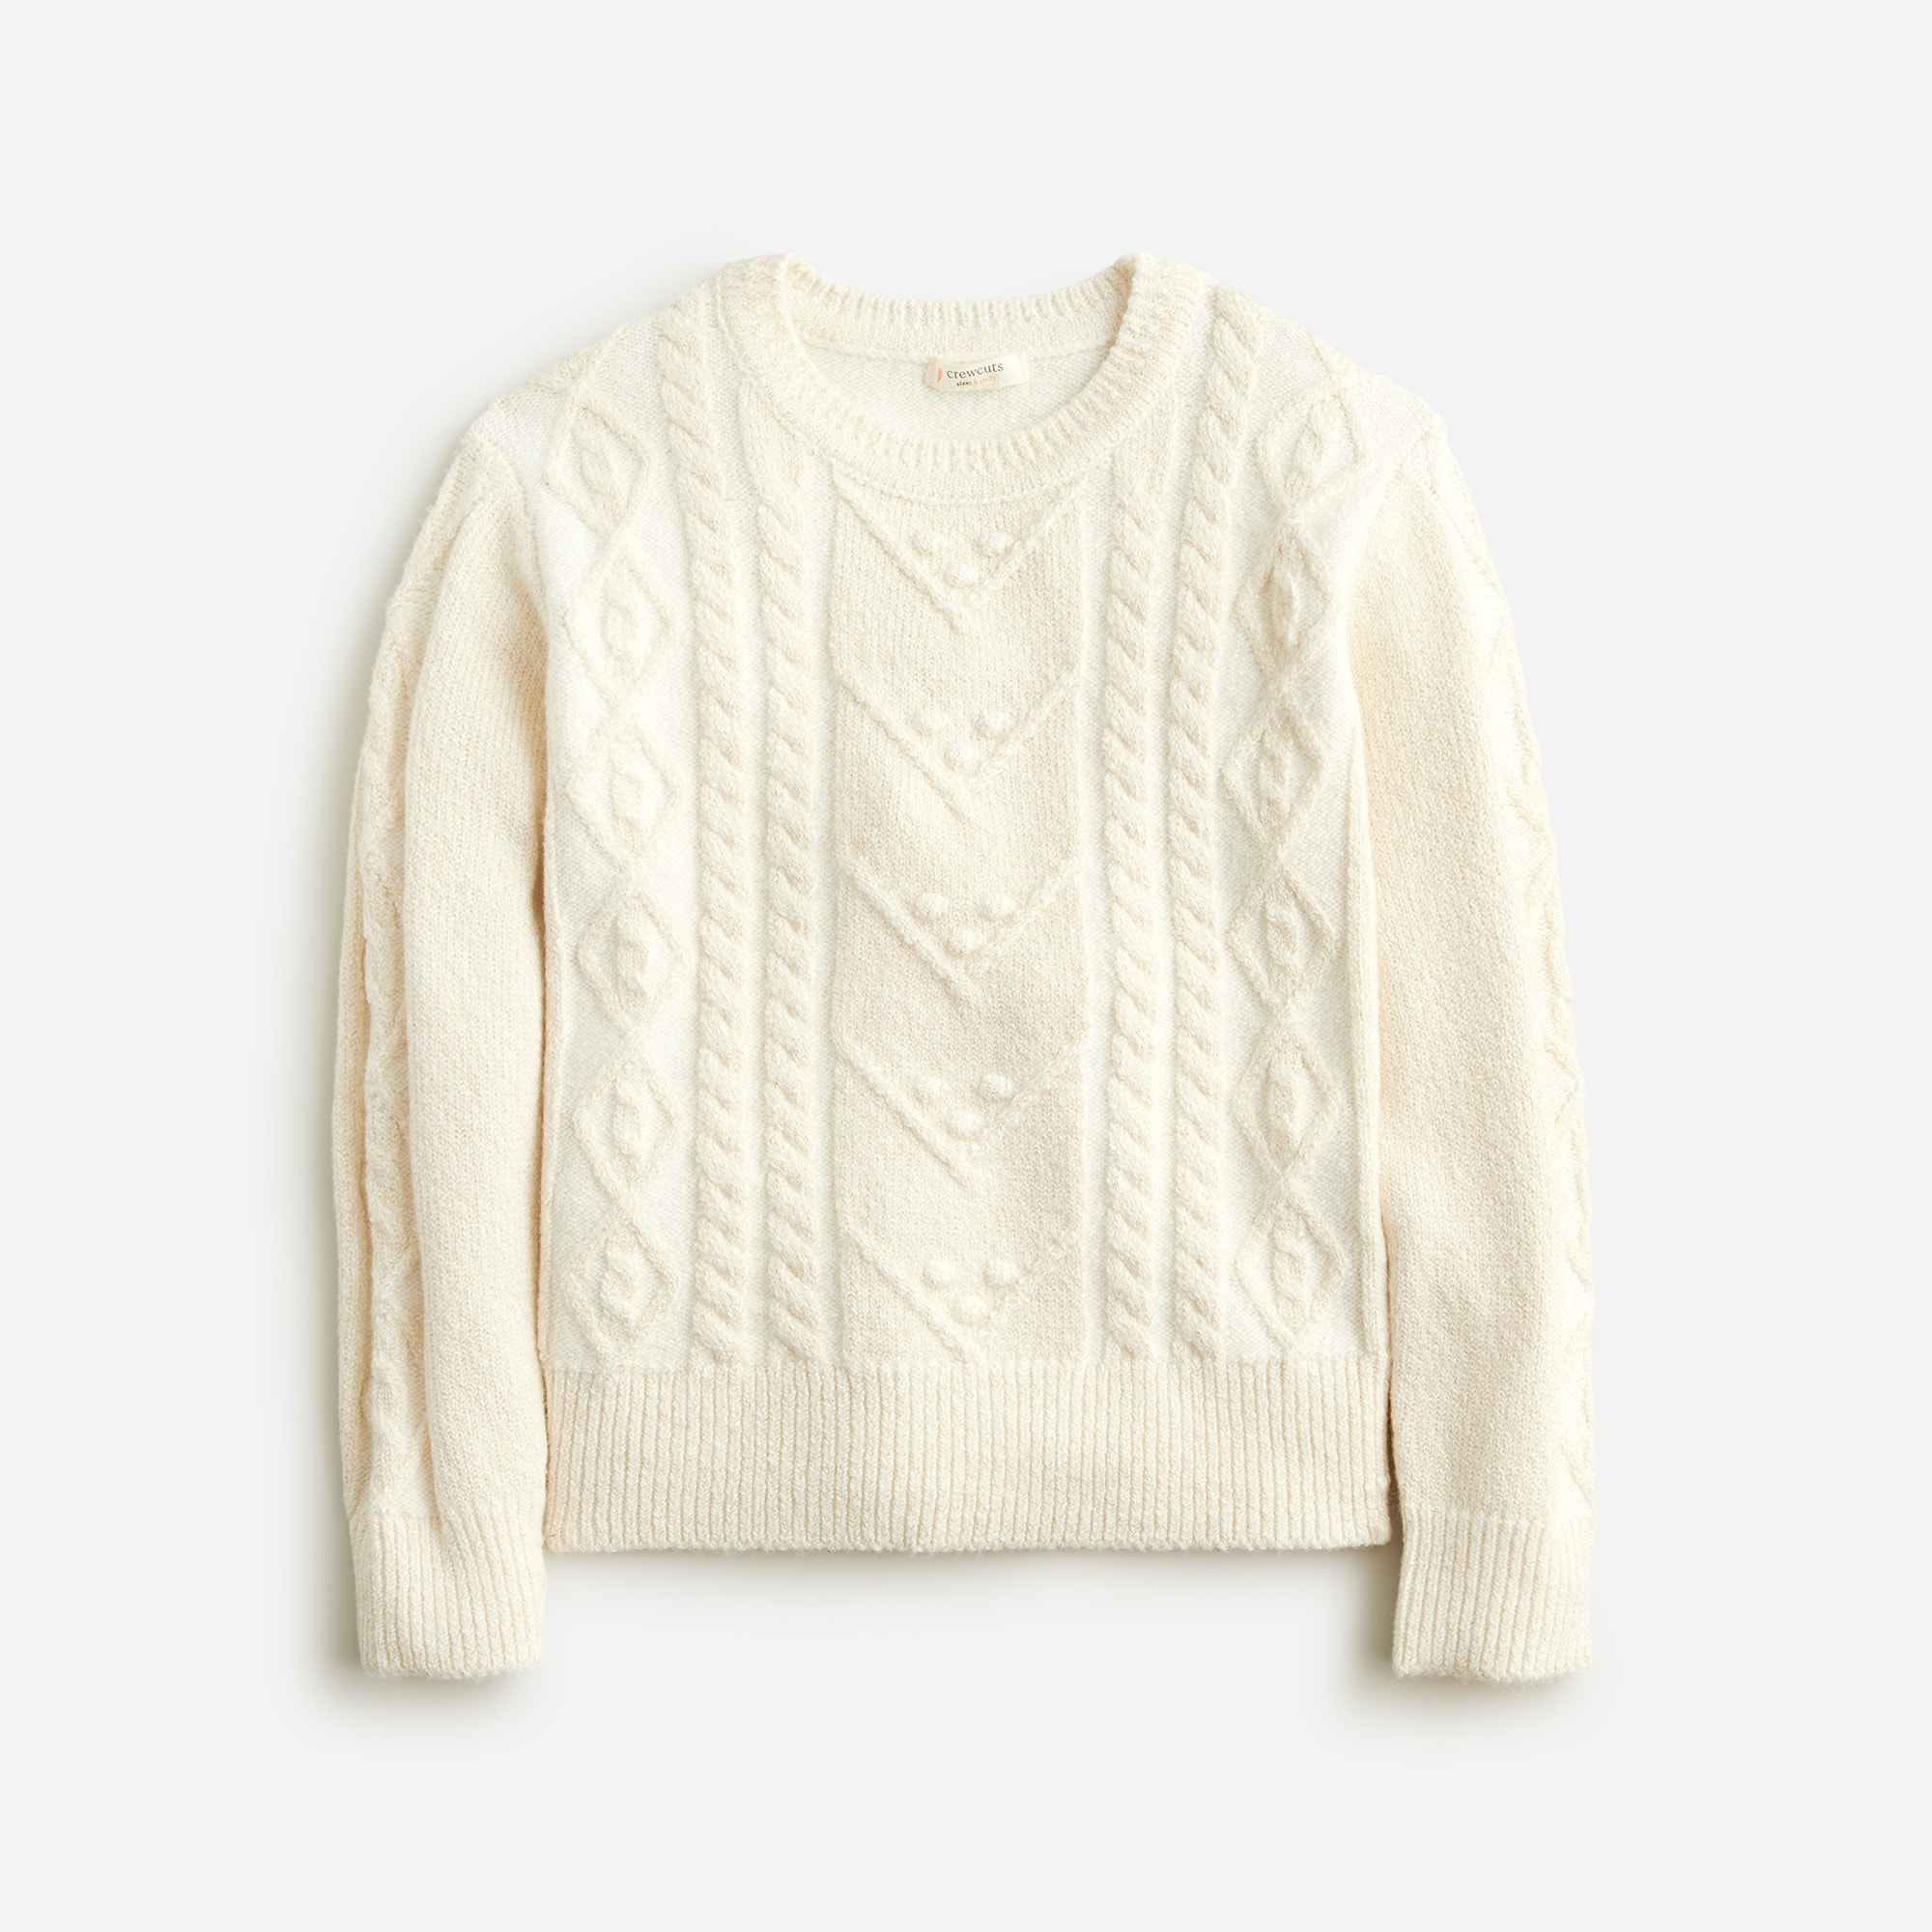 Jcrew Girls sparkle cable-knit sweater